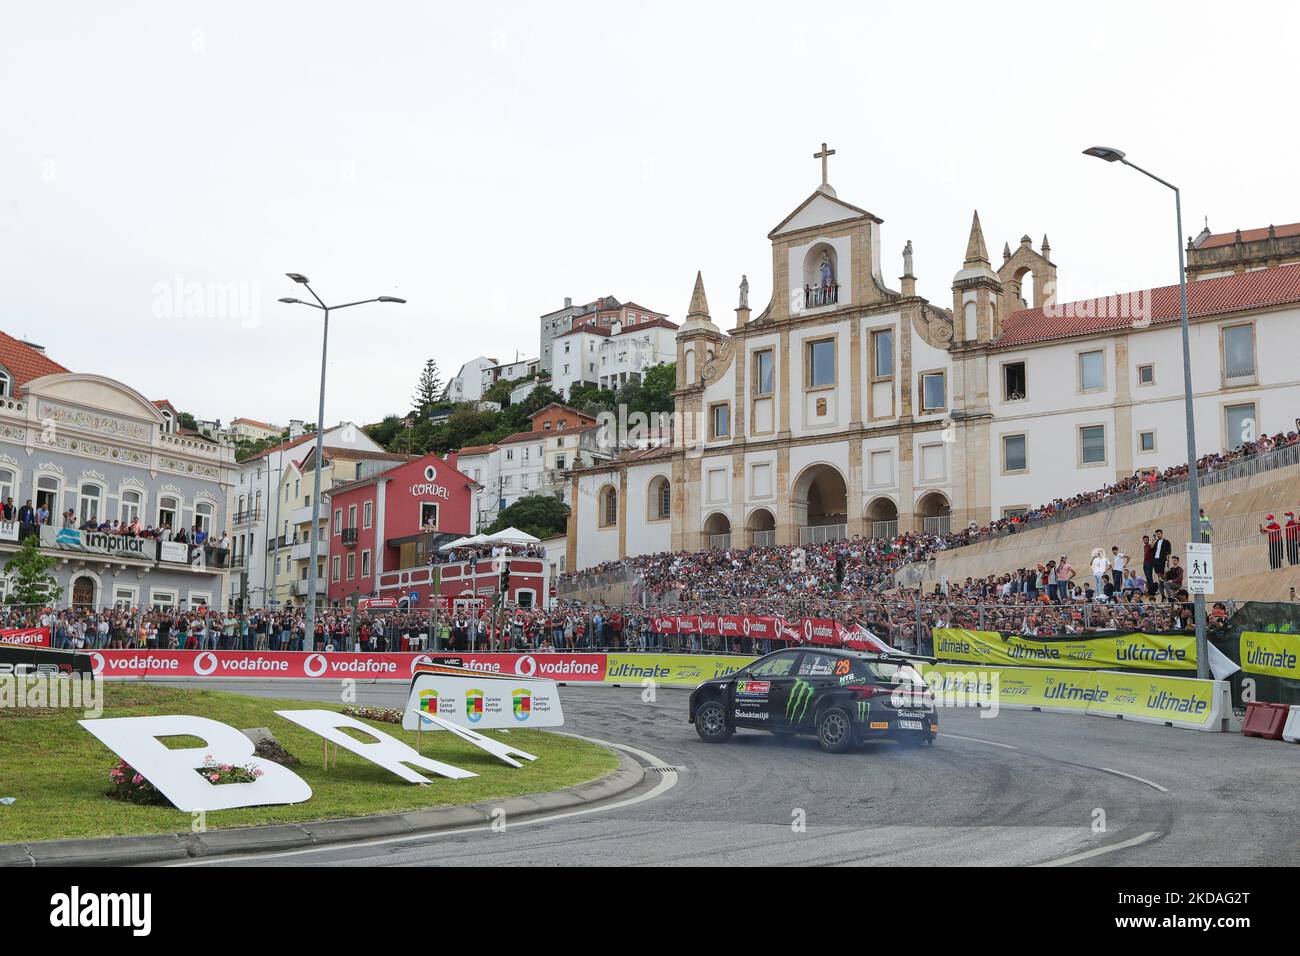 Oliver SOLBERG (SWE) and Elliott EDMONDSON (GBR) in HYUNDAI i20 N of HYUNDAI MOTORSPORT N in action during the SS1 Coimbra Street Stage of the WRC Vodafone Rally Portugal 2022 in Matosinhos - Portugal, on May 19, 2022. (Photo by Paulo Oliveira / NurPhoto) Stock Photo